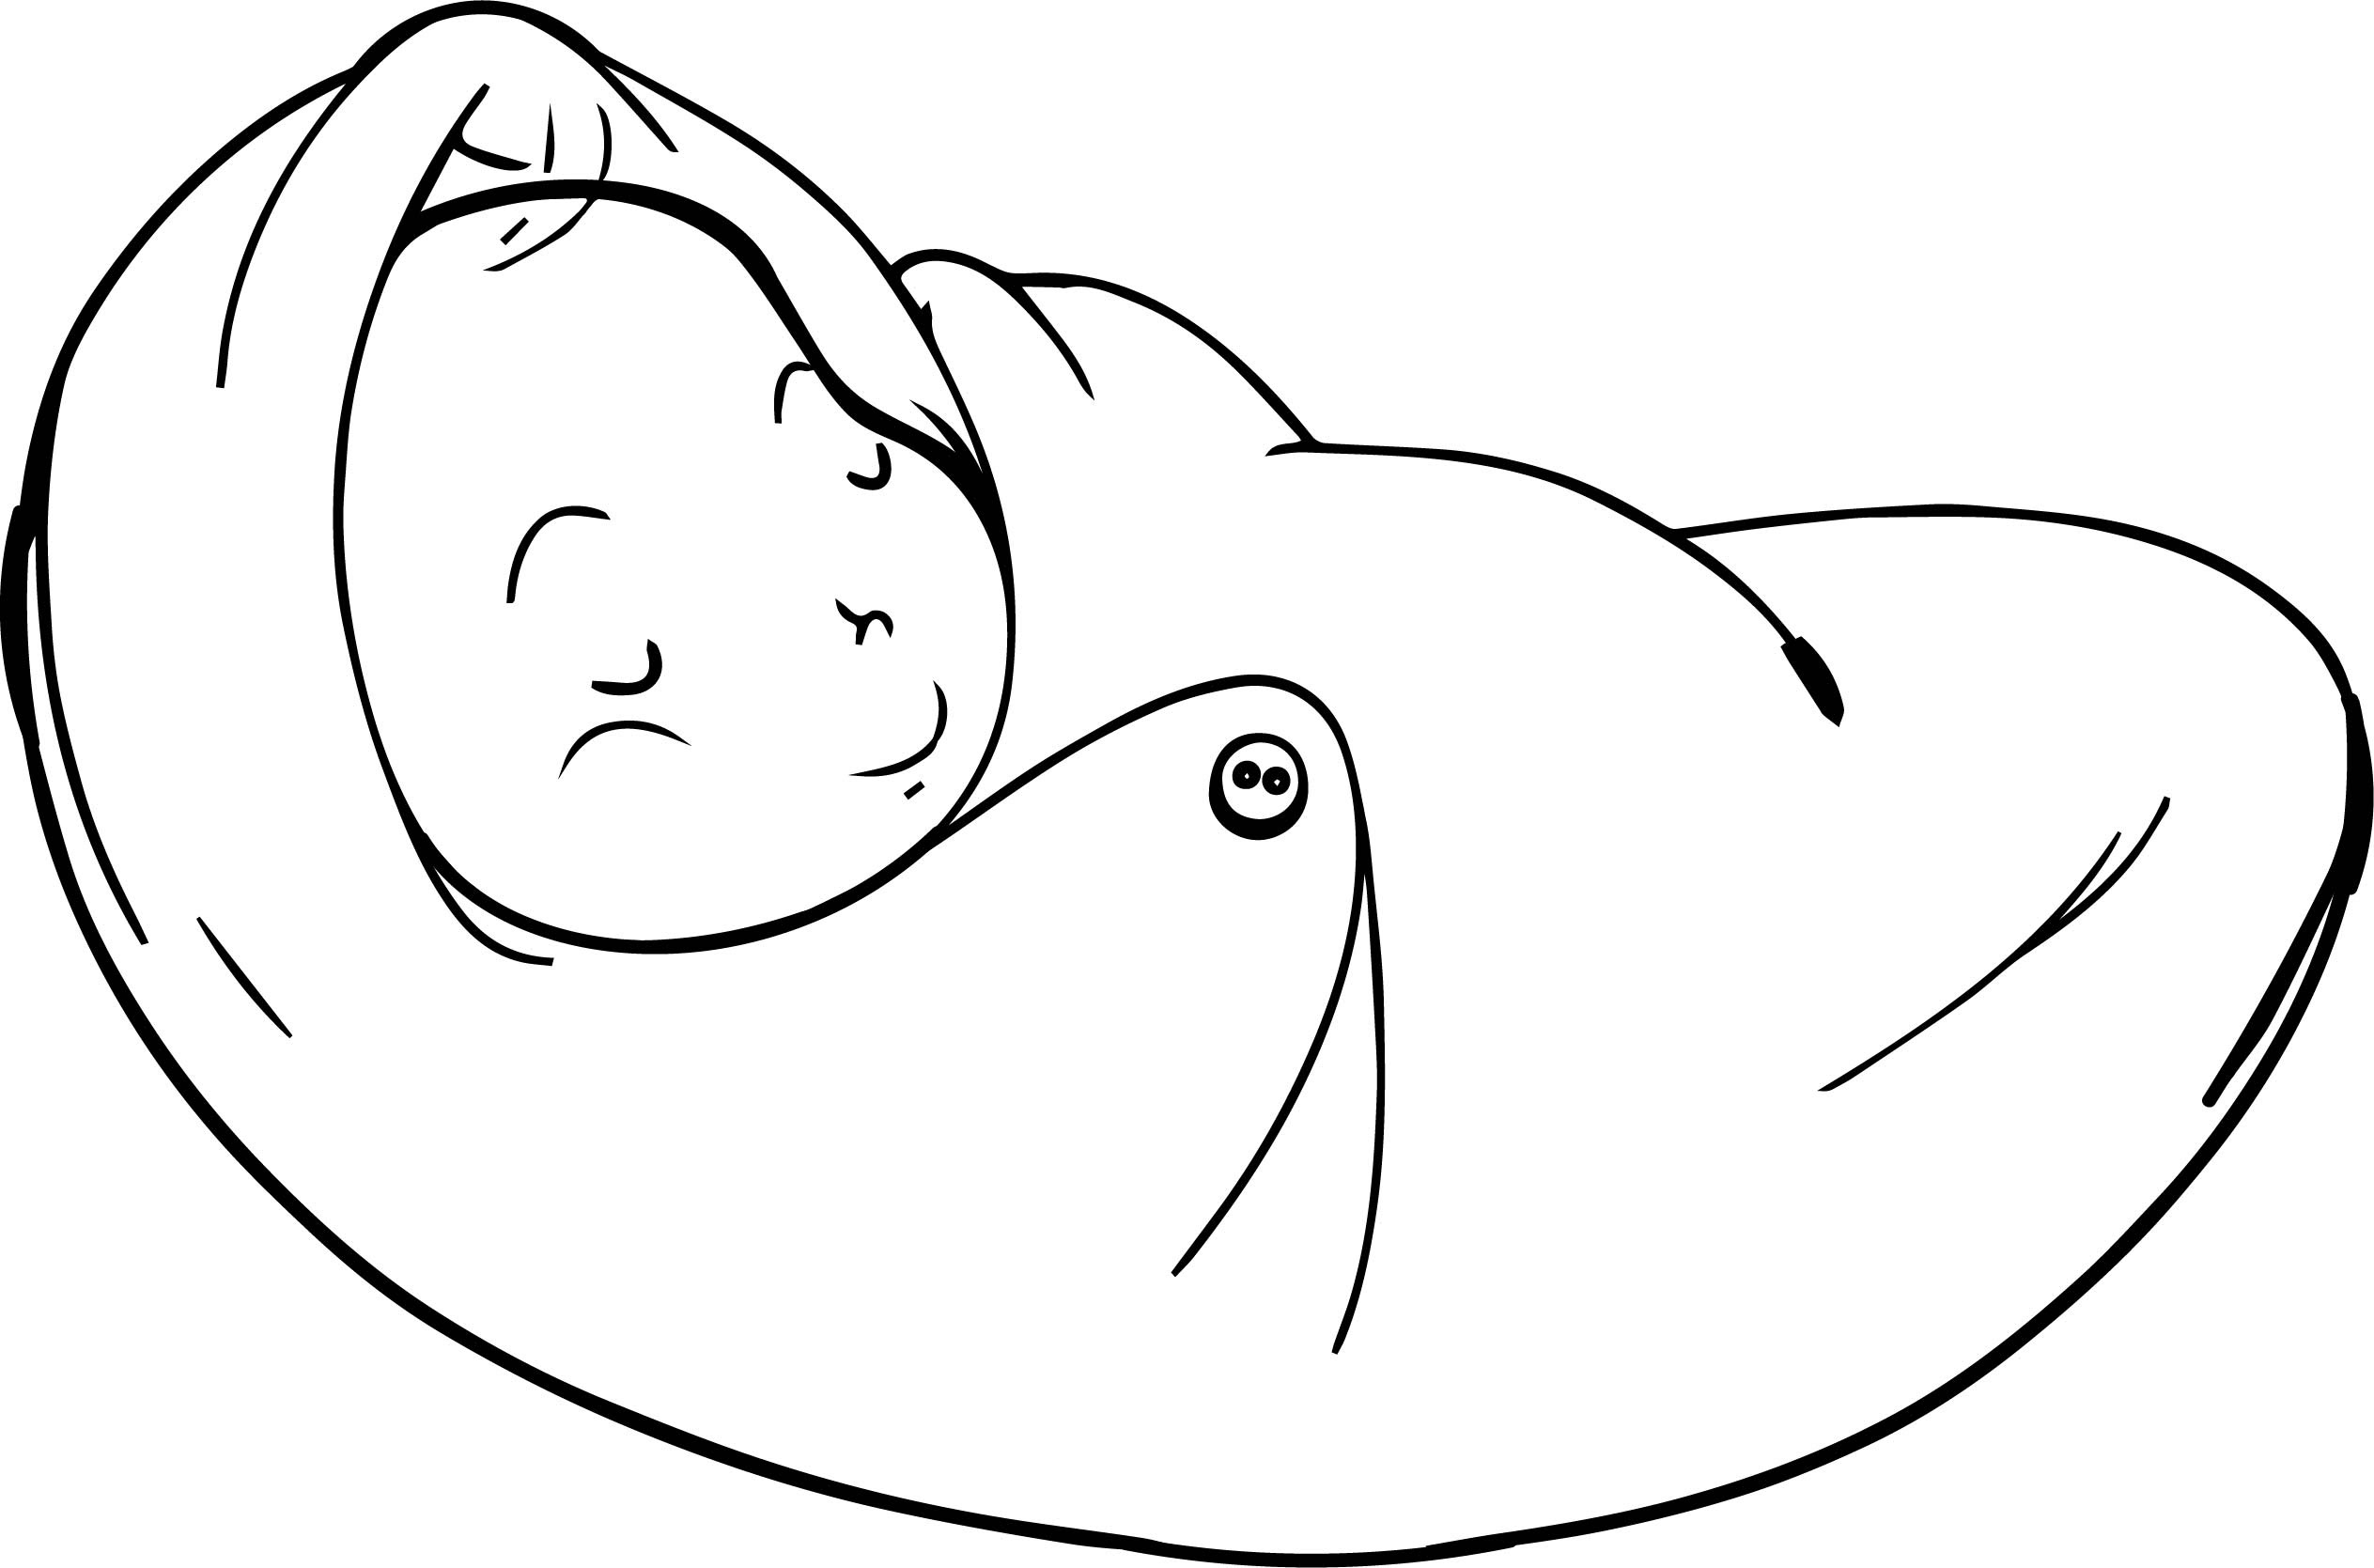 Sleeping Baby Boy Coloring Page Wecoloringpage.com - Coloring Pages